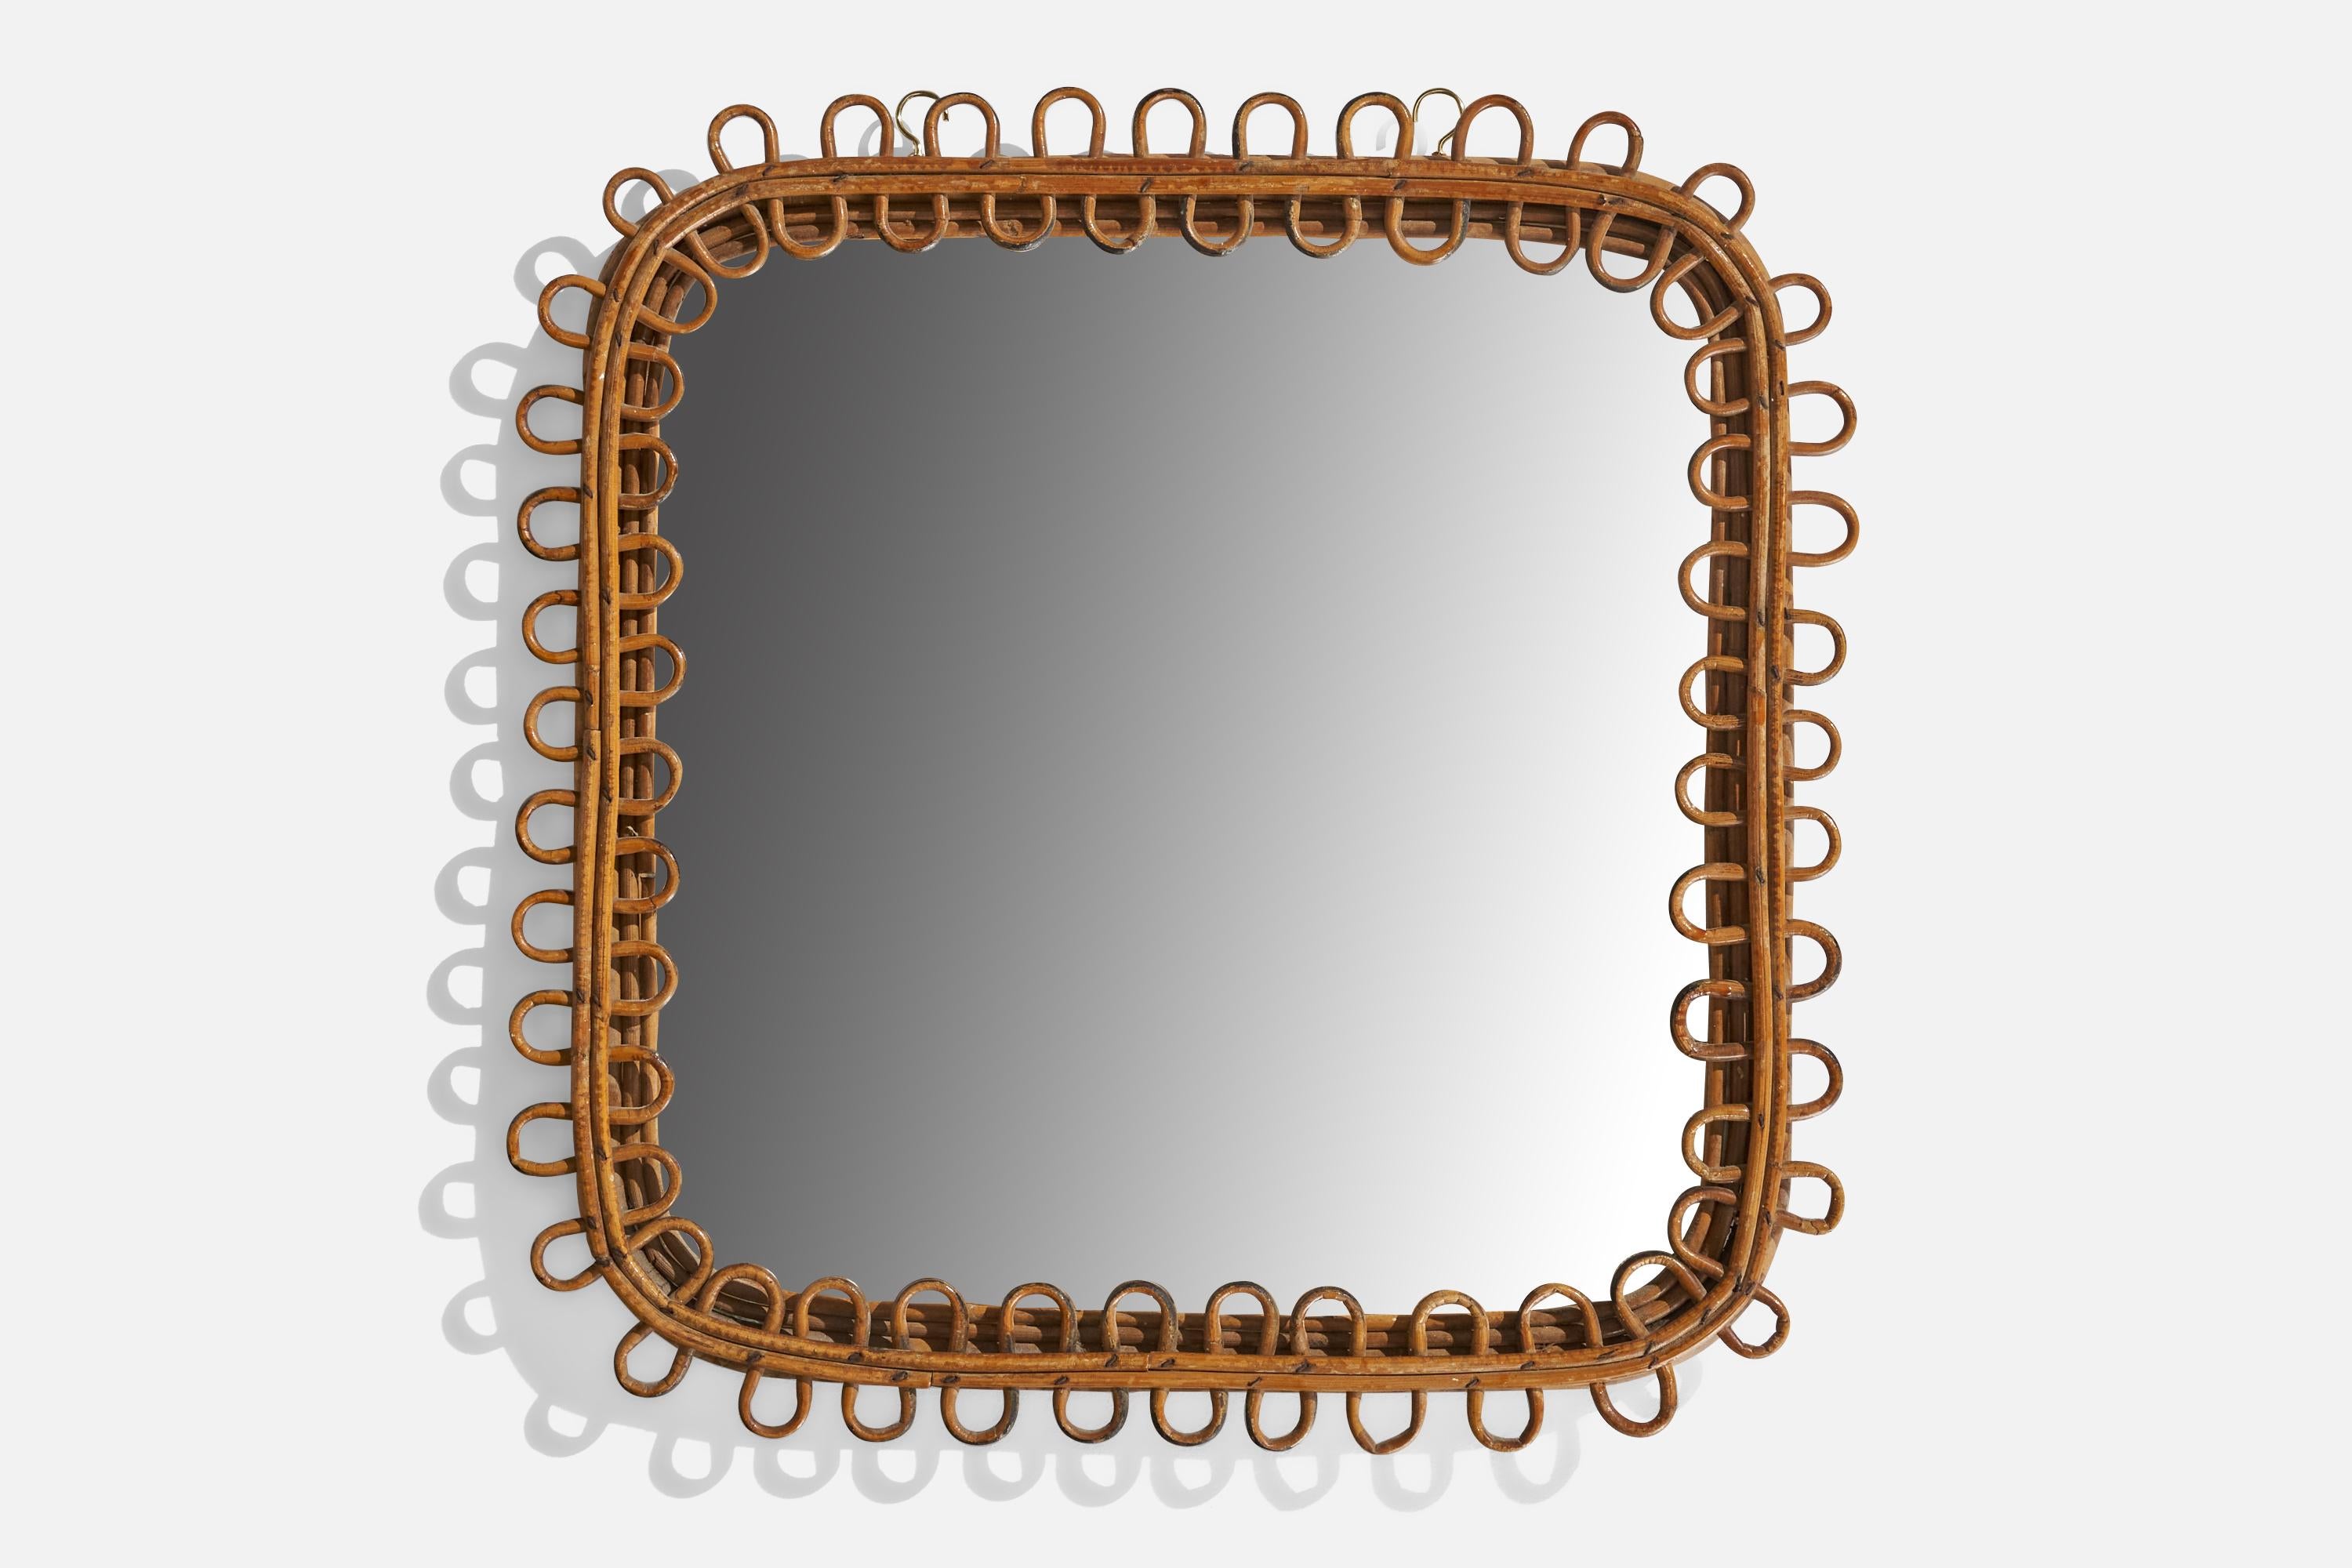 A rattan wall mirror designed and produced in Italy, c. 1960s.